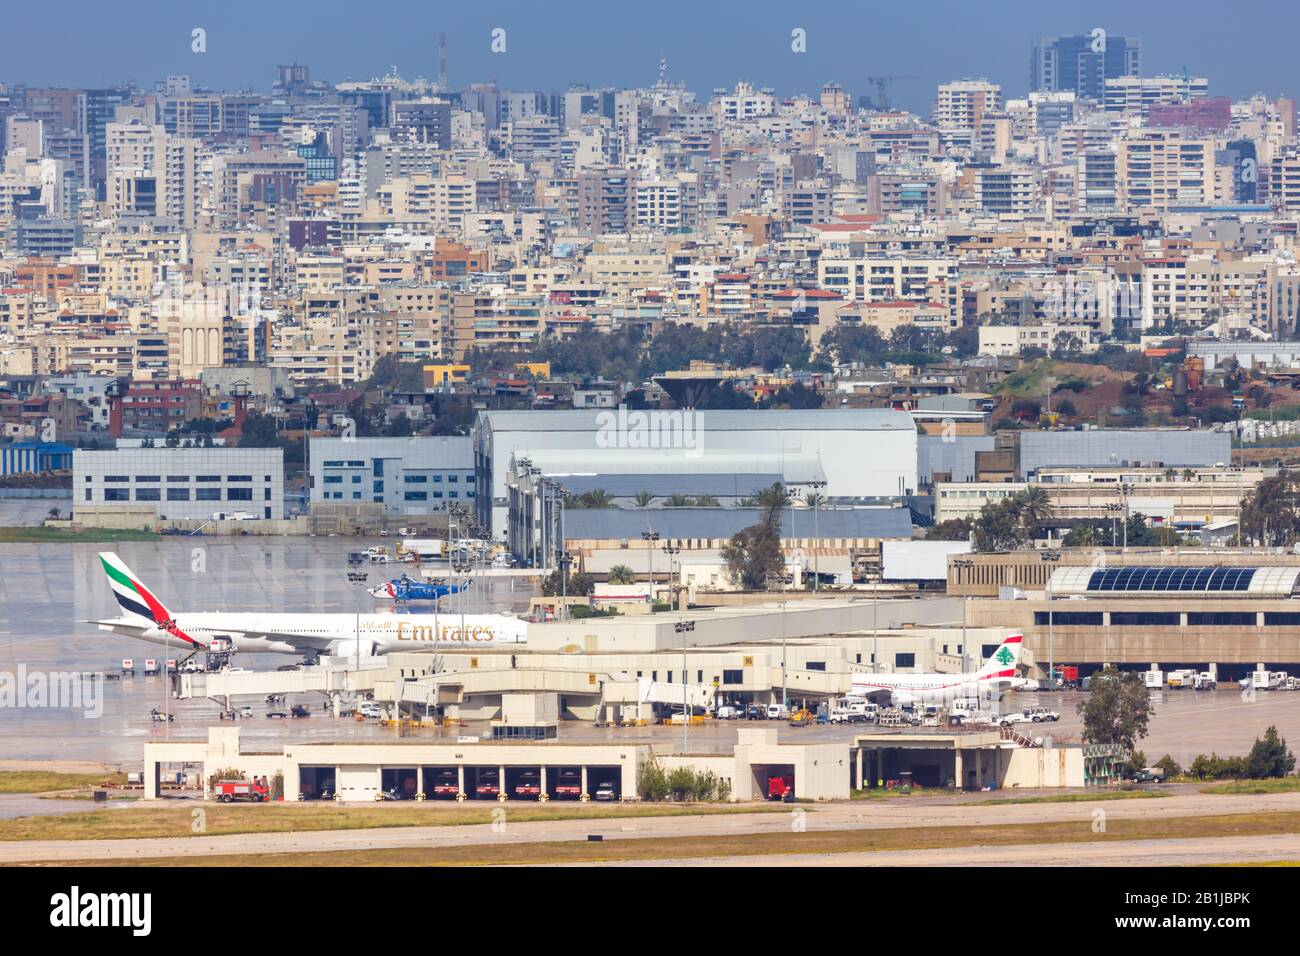 Beirut, Lebanon – February 16, 2019: Overview of Beirut airport (BEY) in Lebanon. Stock Photo